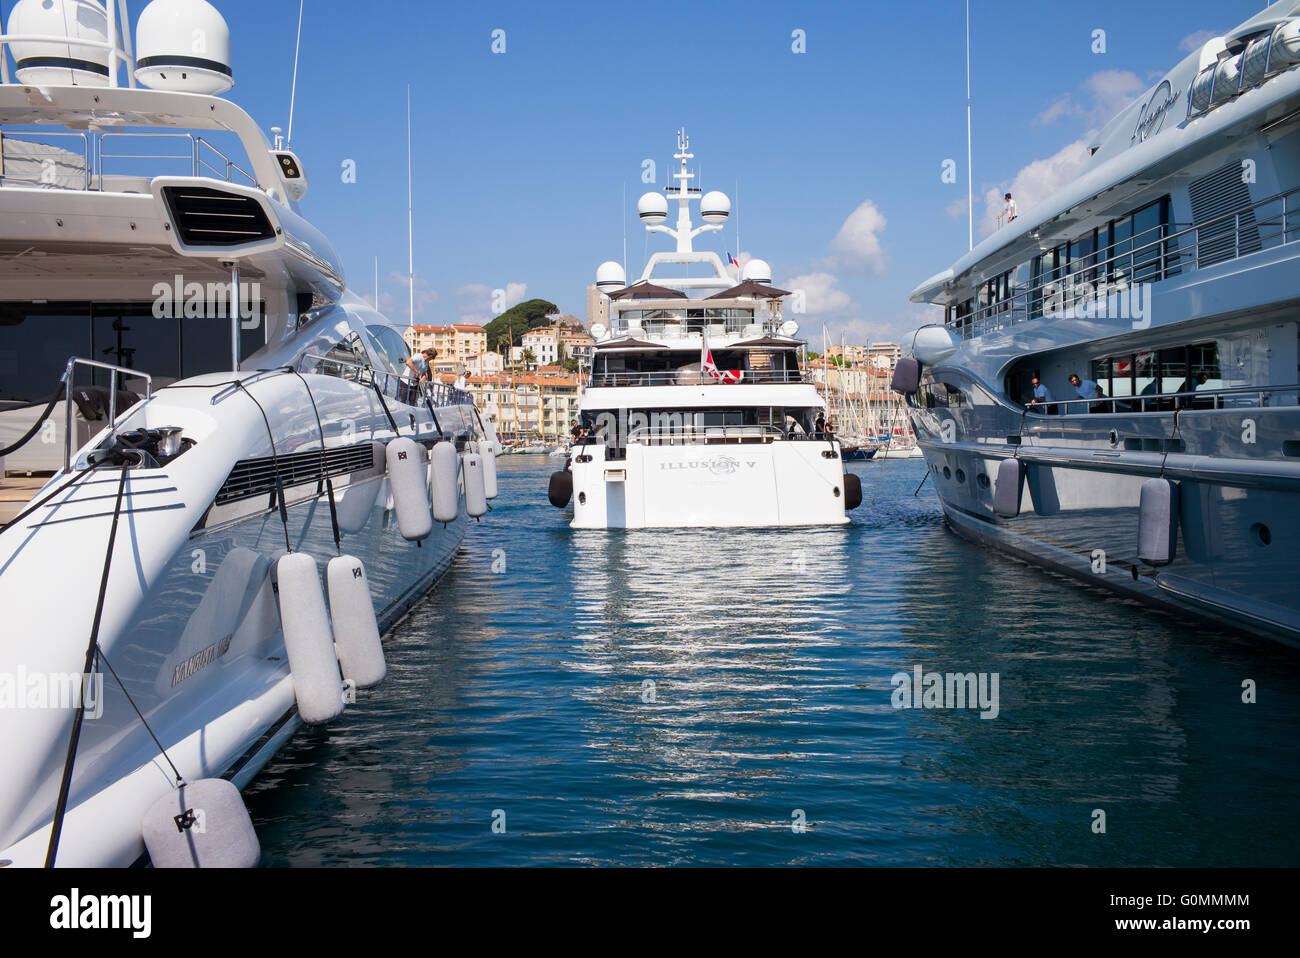 Luxury yachts moored at Cannes, France. The old town of Le Suquet is in the background. Stock Photo